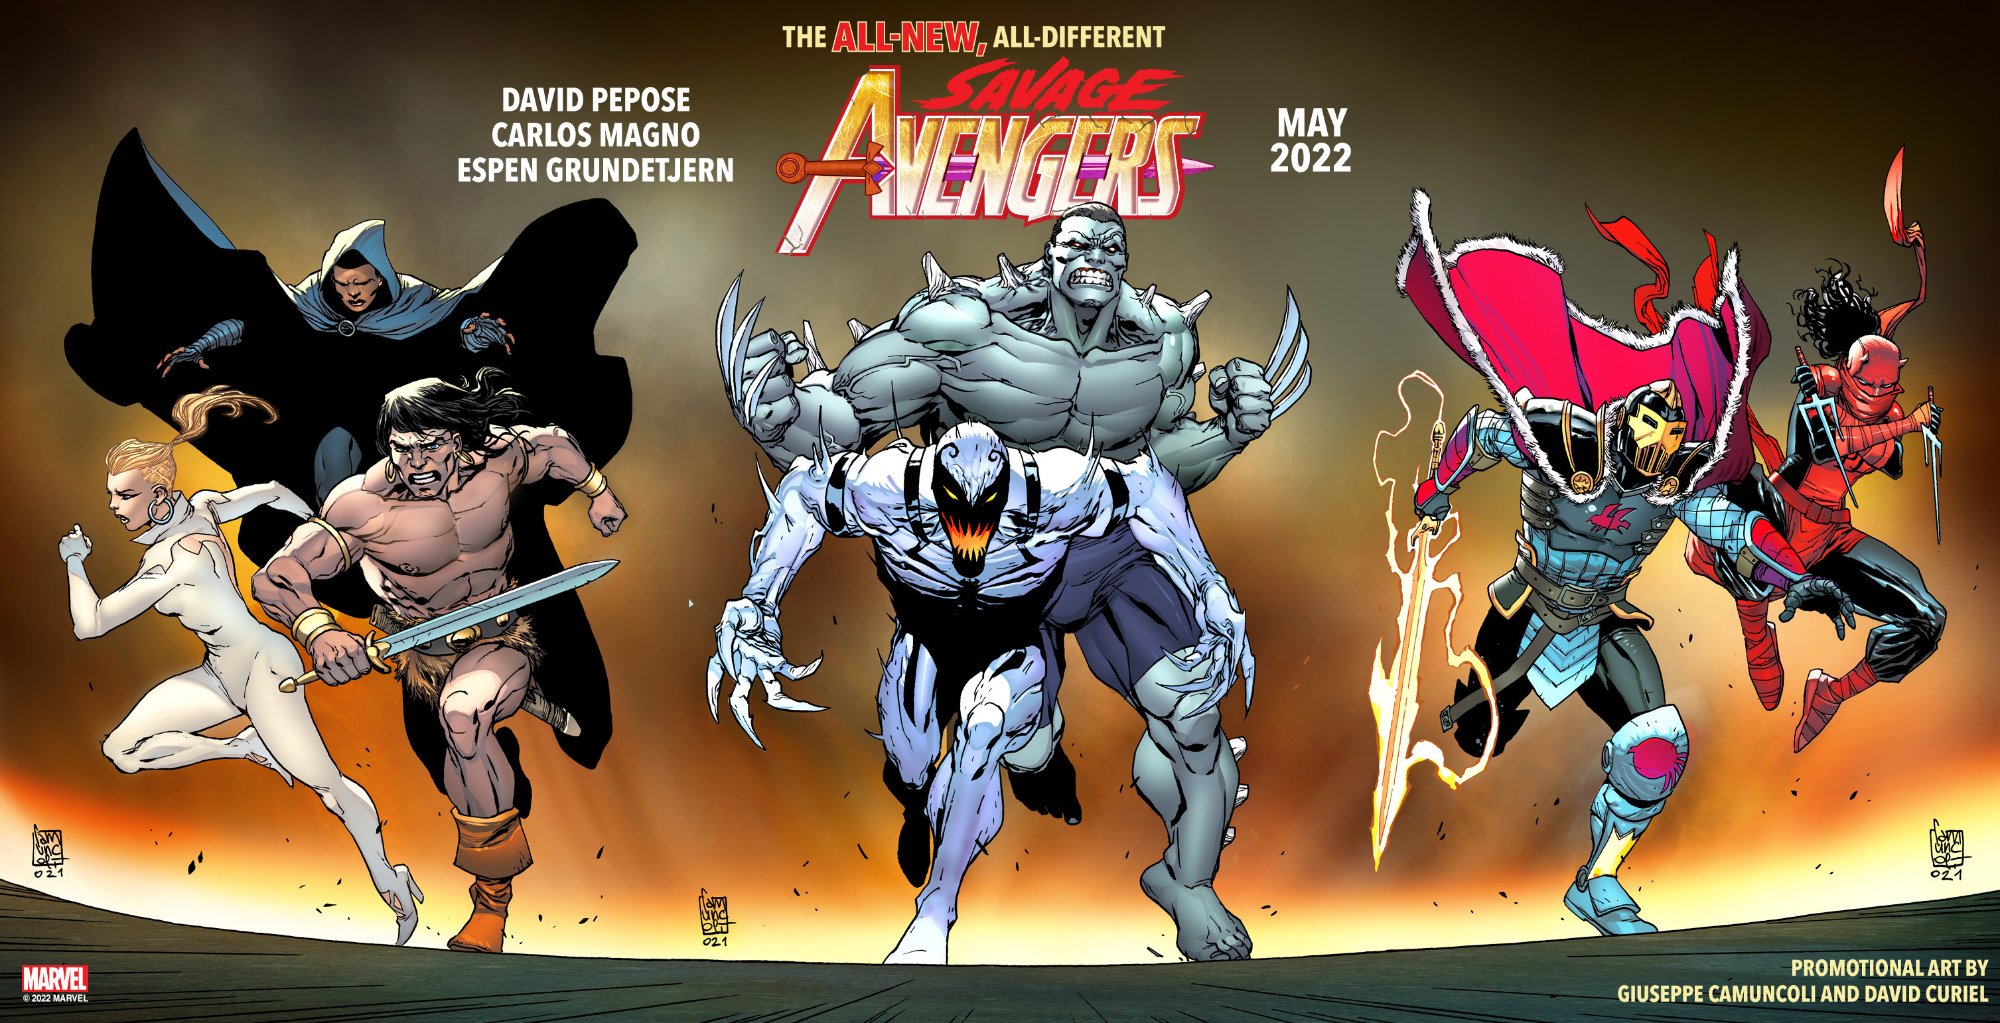 Marvel's 'All-New, All-Different Savage Avengers' teasers by Giuseppe Camuncoli